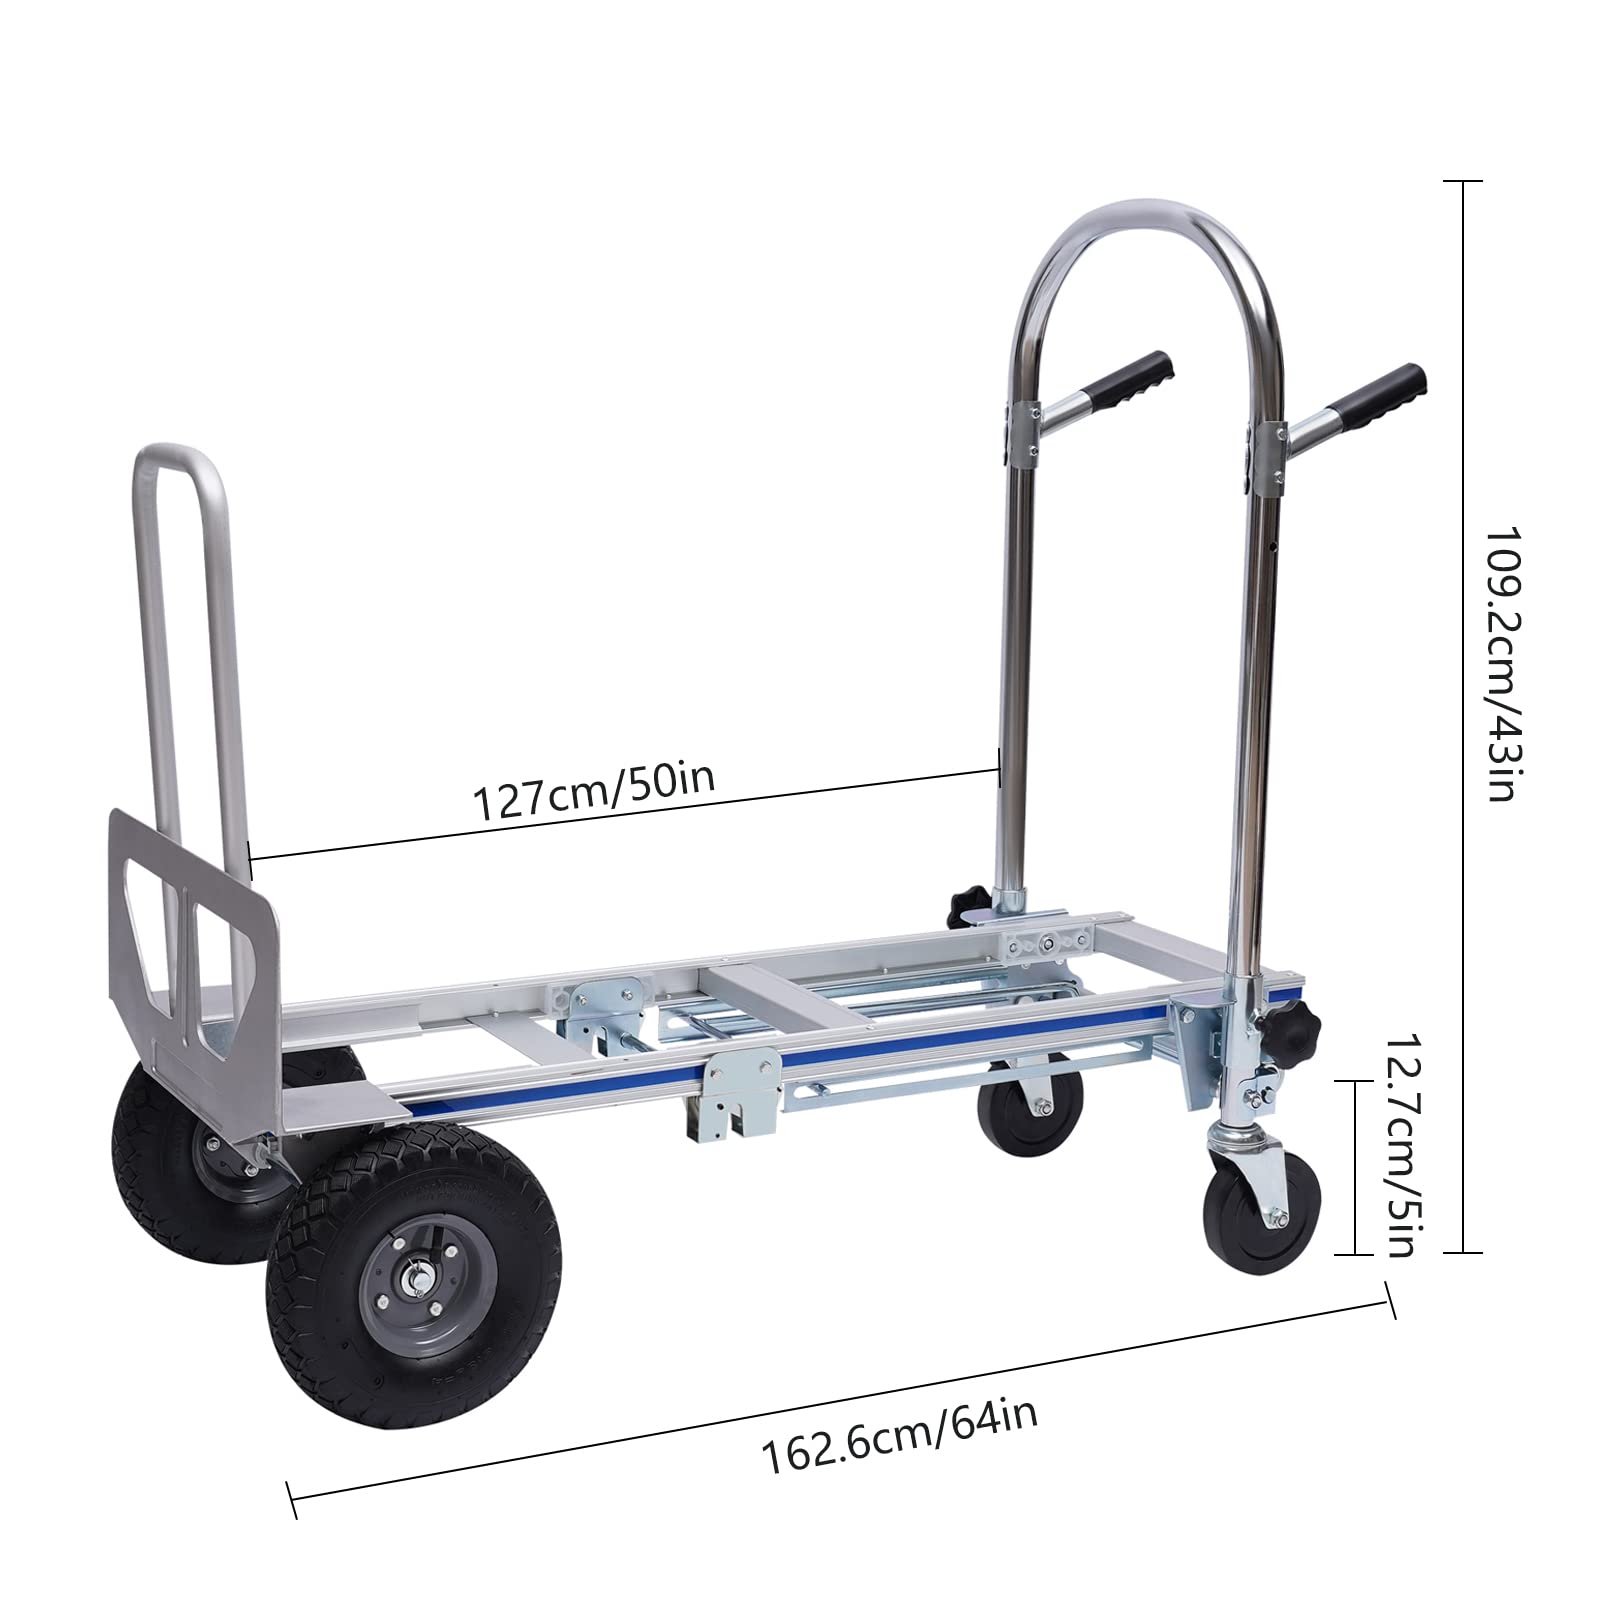 Folding Hand Truck, 700lbs Aluminum Convertible Cart 3 in1 Stair Climber Dolly Foldable Utility Dolly Rubber Wheels Silver